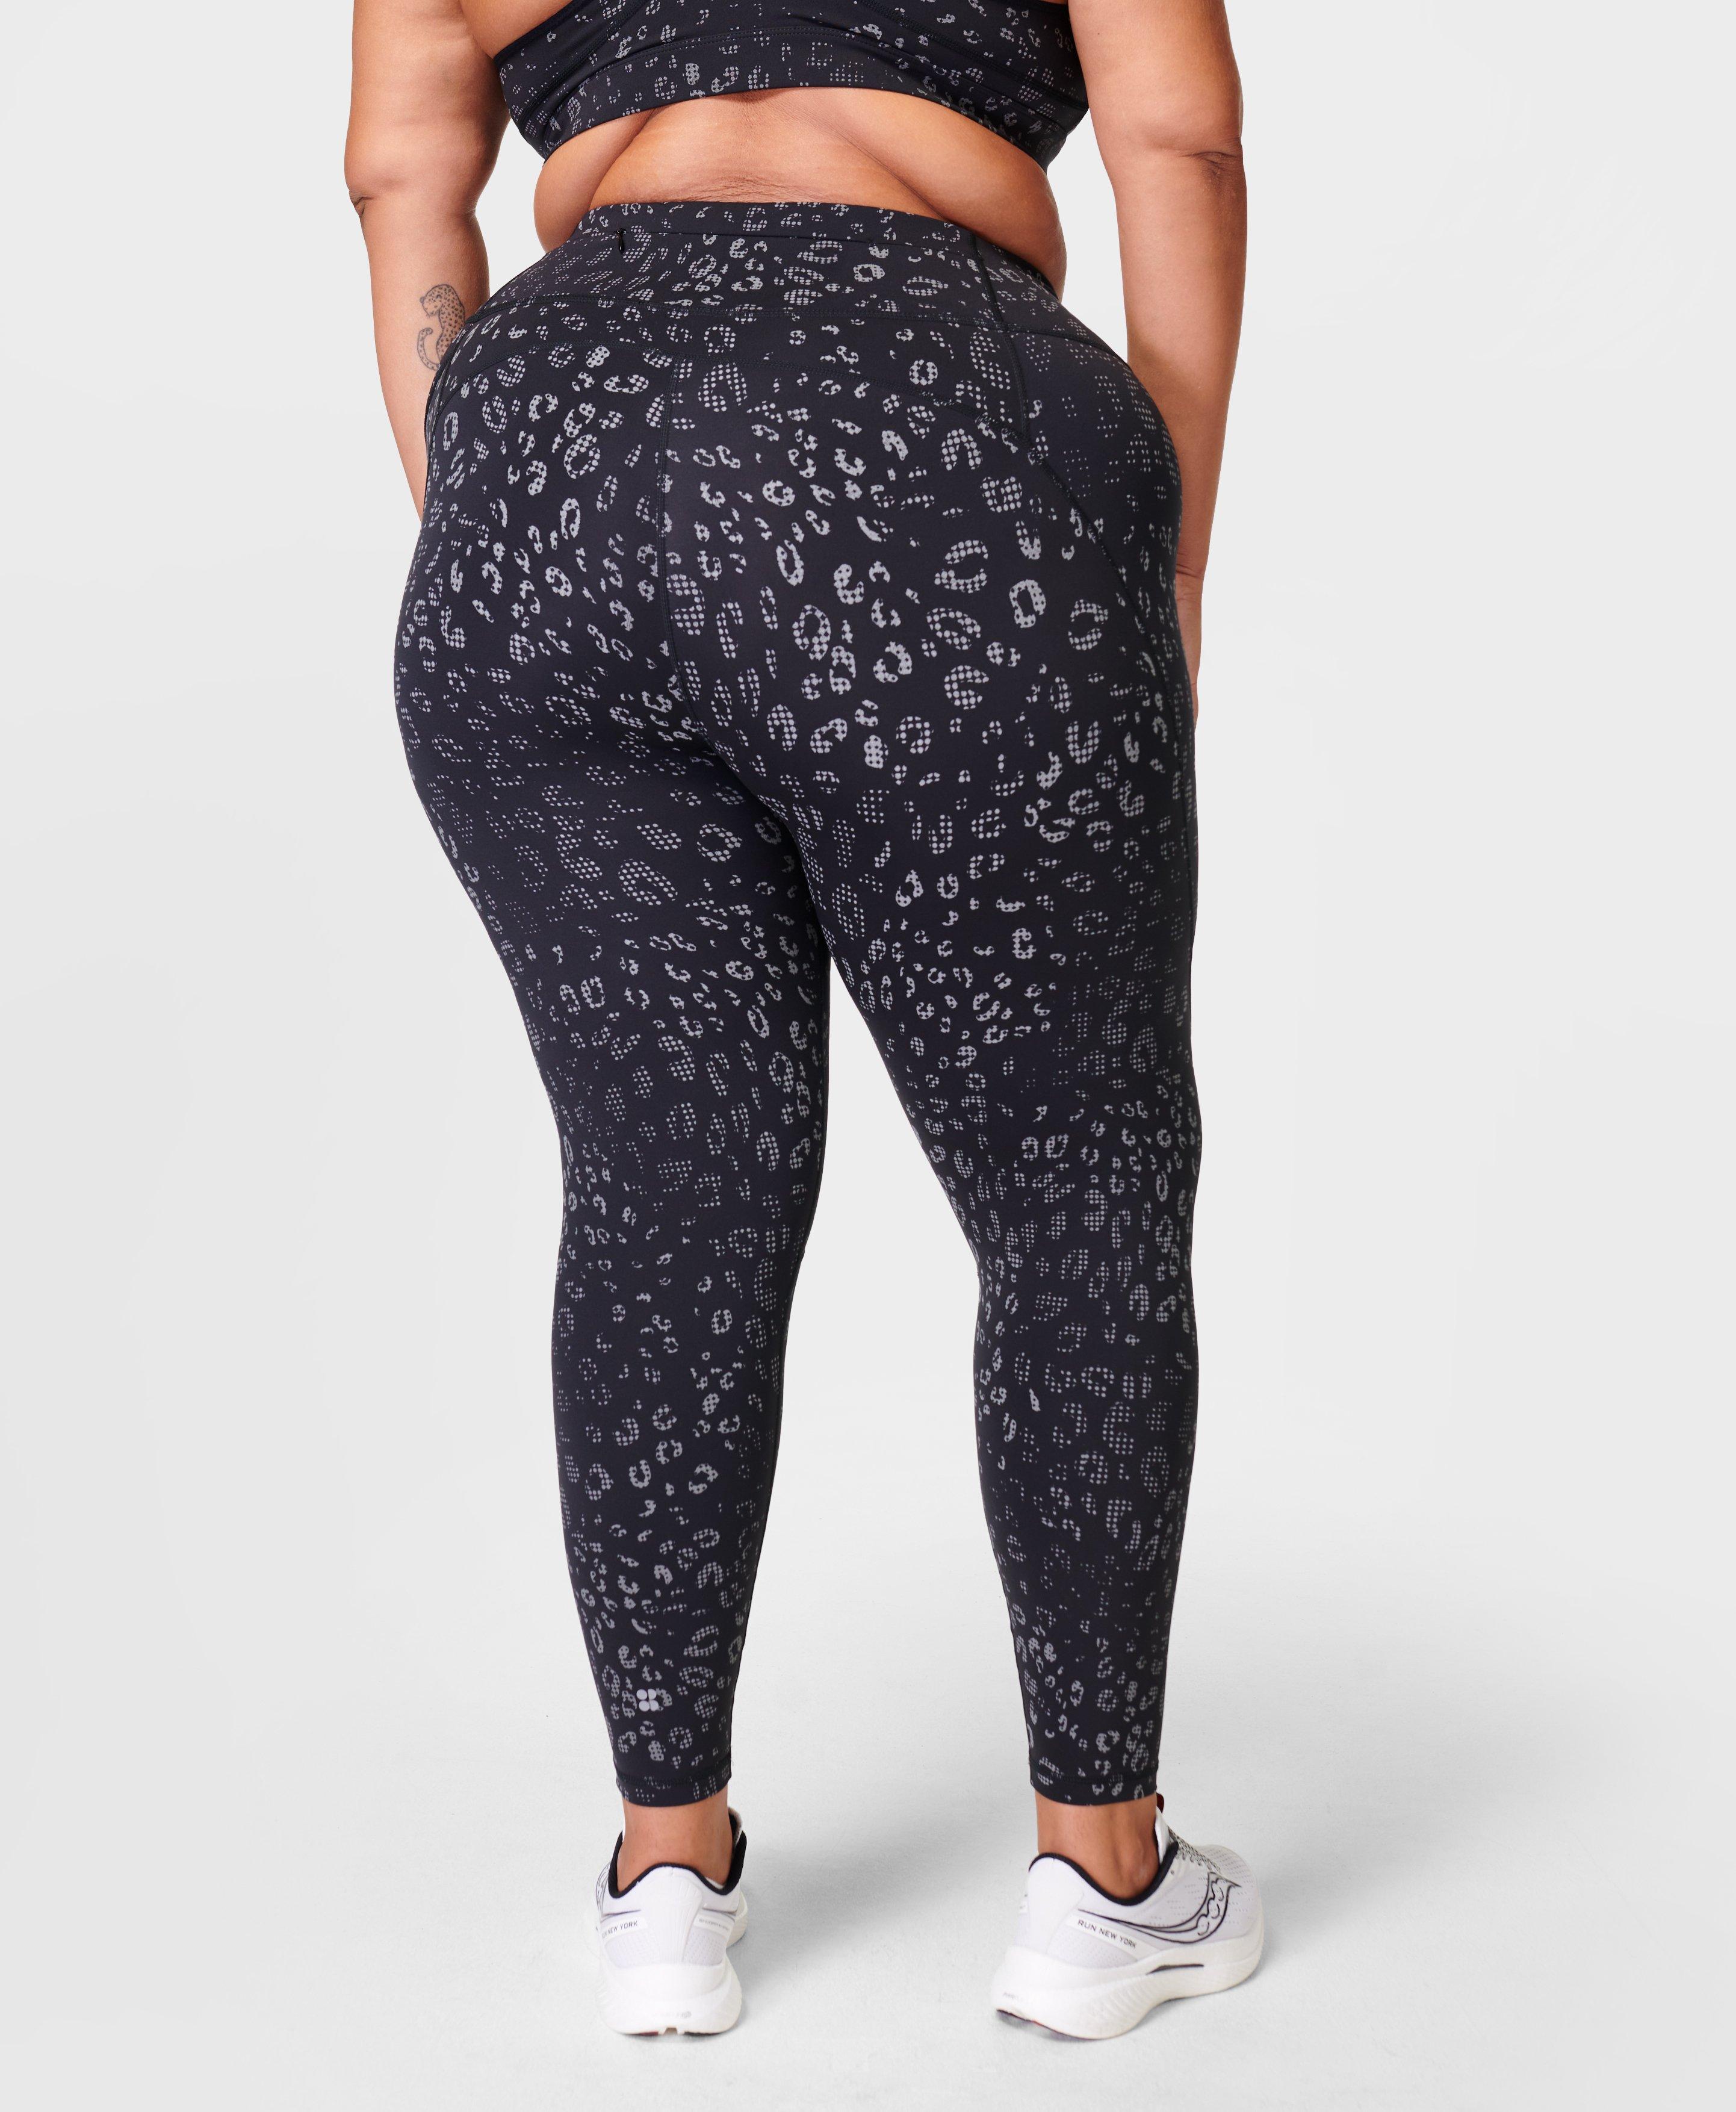 Leopard leggings are super wearable—here are 11 to try